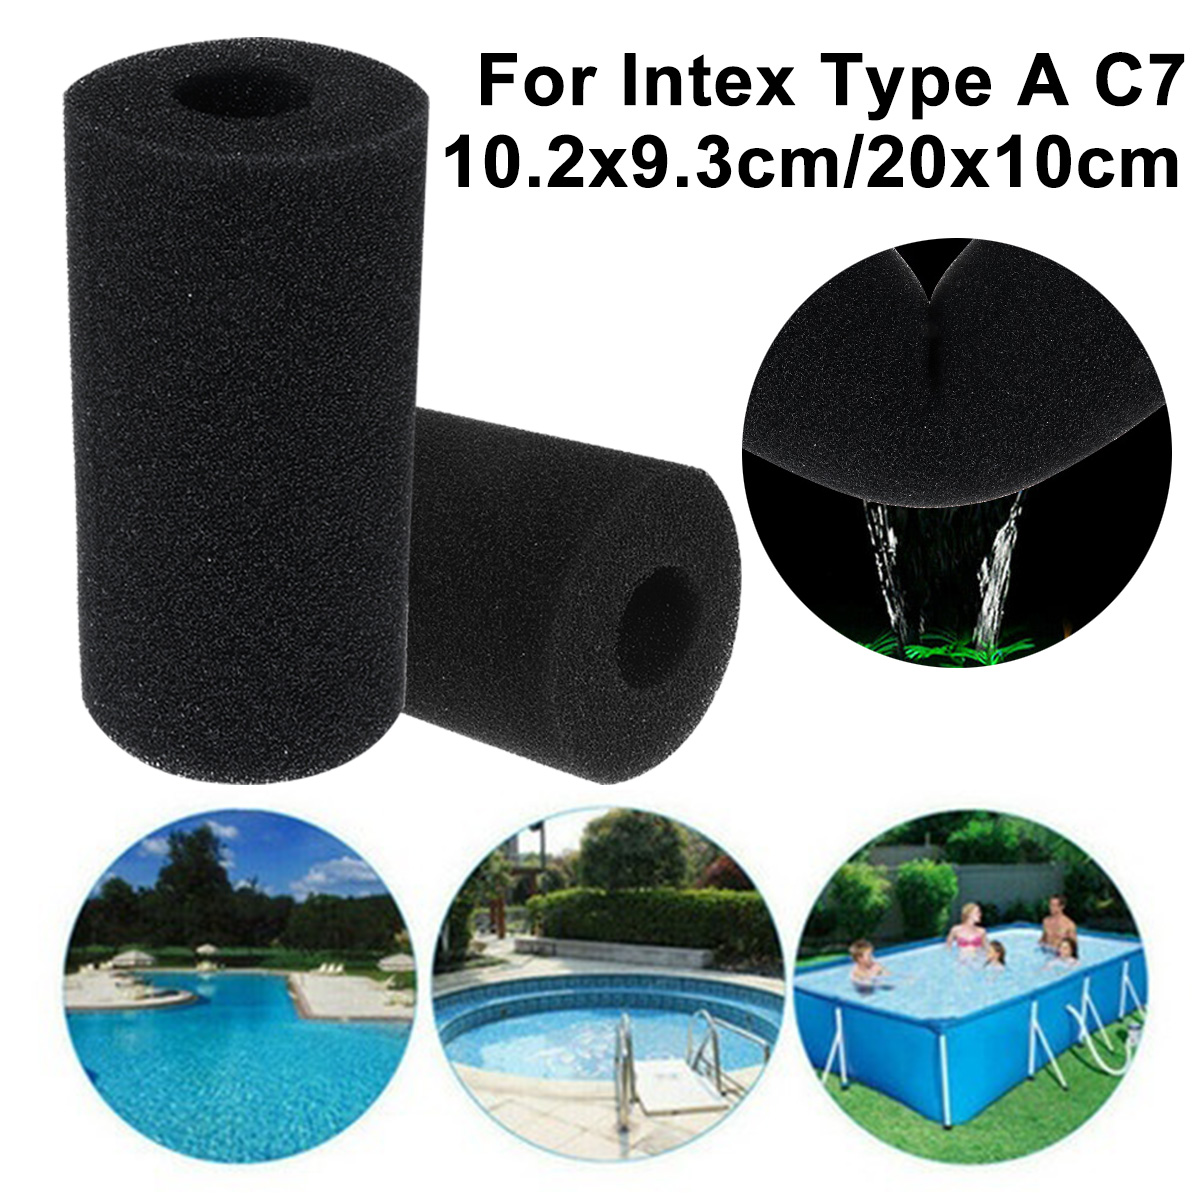 Swimming-Pool-Cleaning-Sponge-Column-Suitable-for-Intex-Type-A-C7-1934963-2